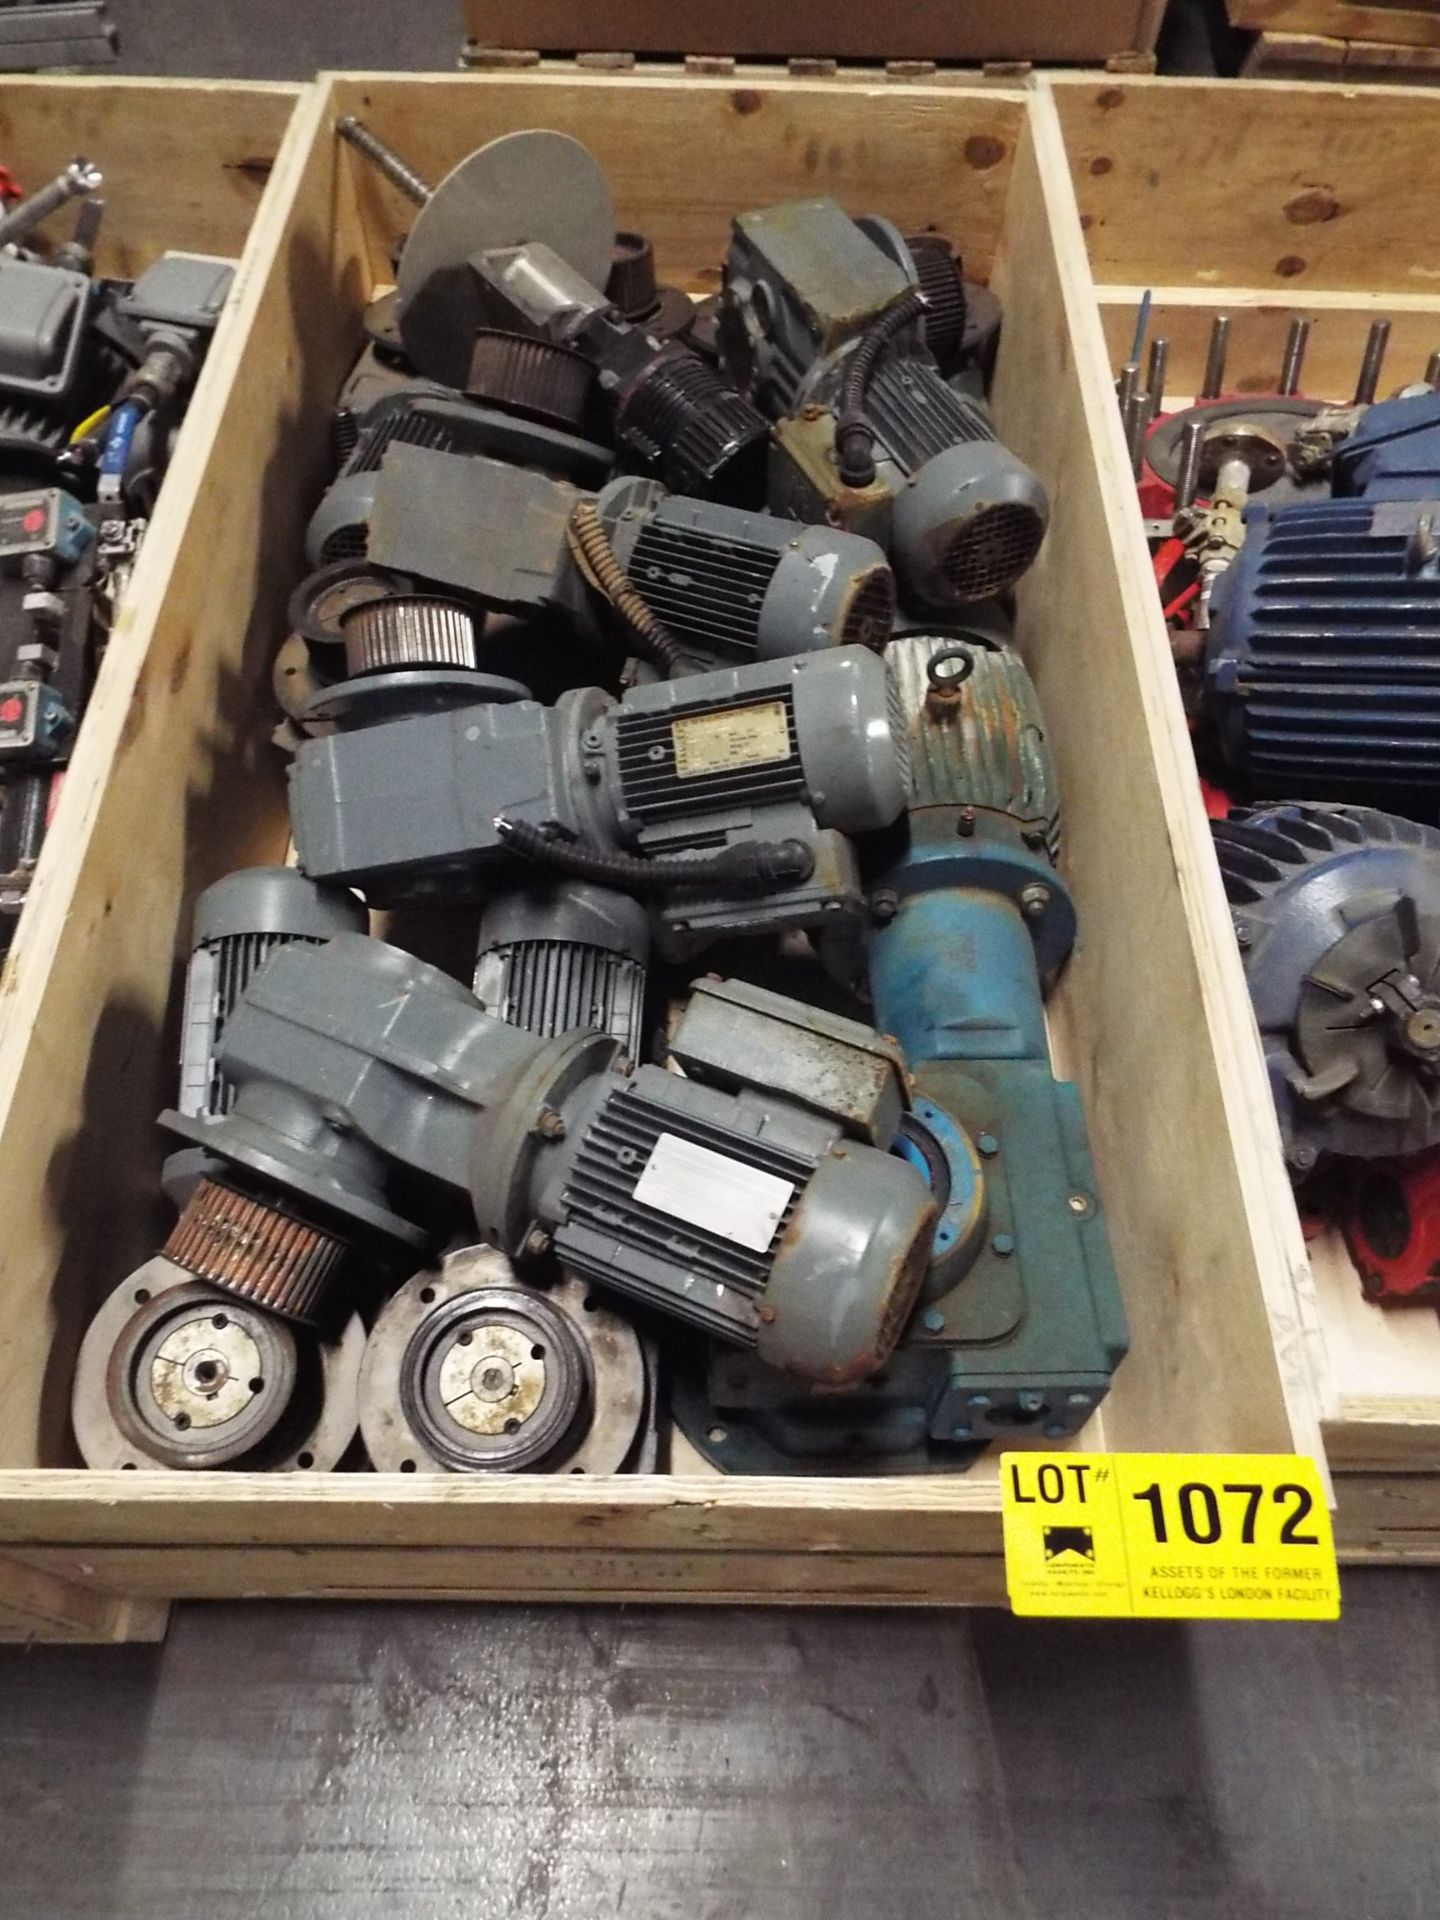 LOT/ CONTENTS OF SKID - (12) GEARBOXES WITH MOTORS